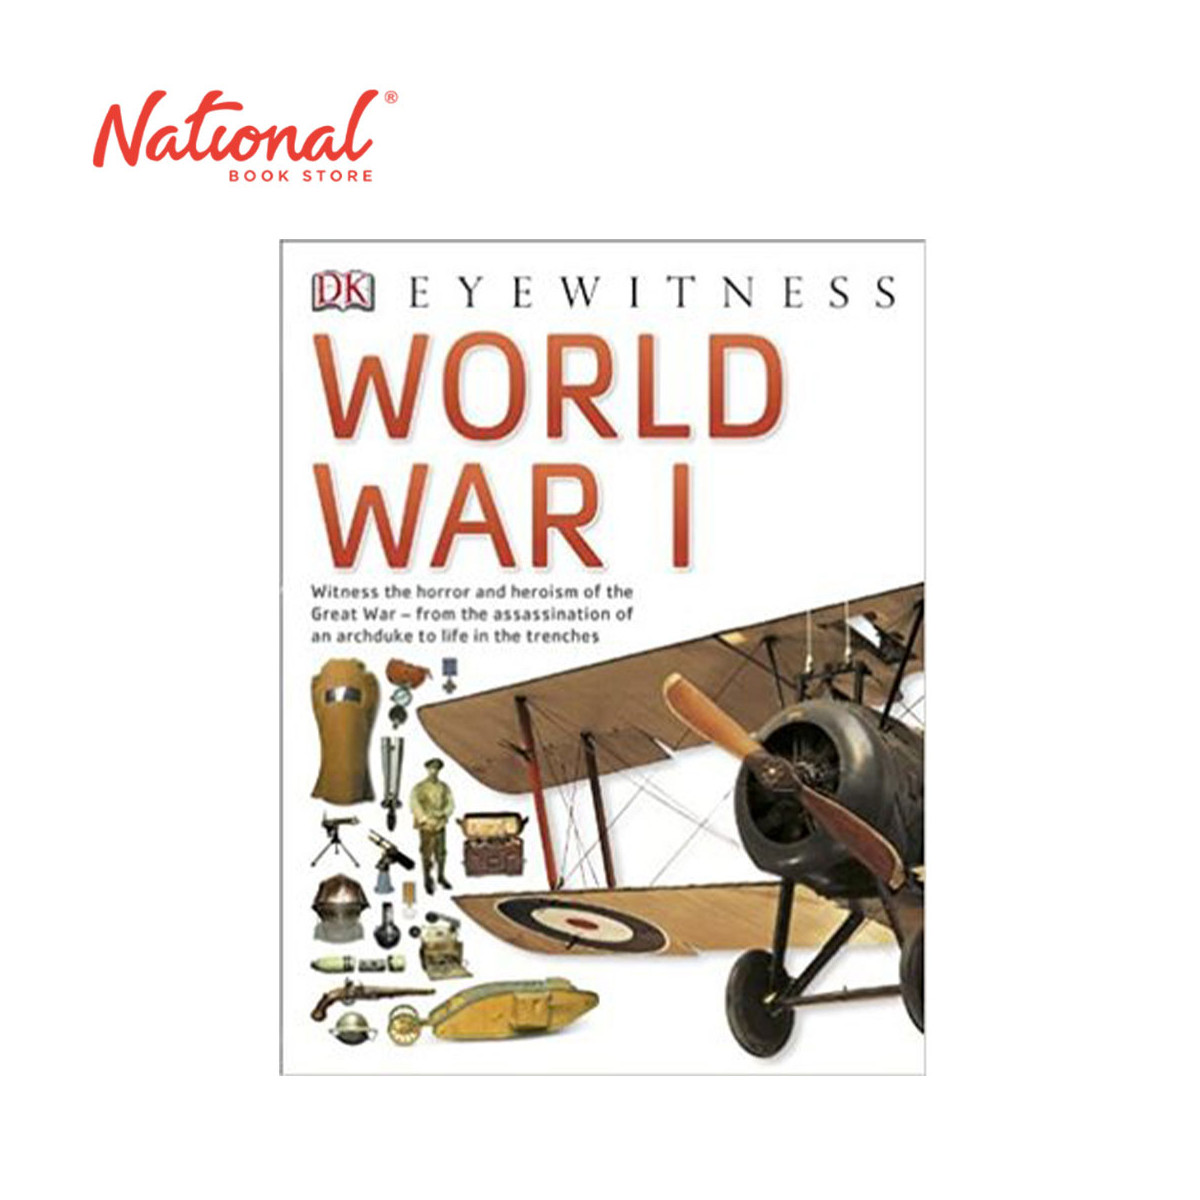 DK Eyewitness: World War I by Various Authors - Trade Paperback - History & Biography